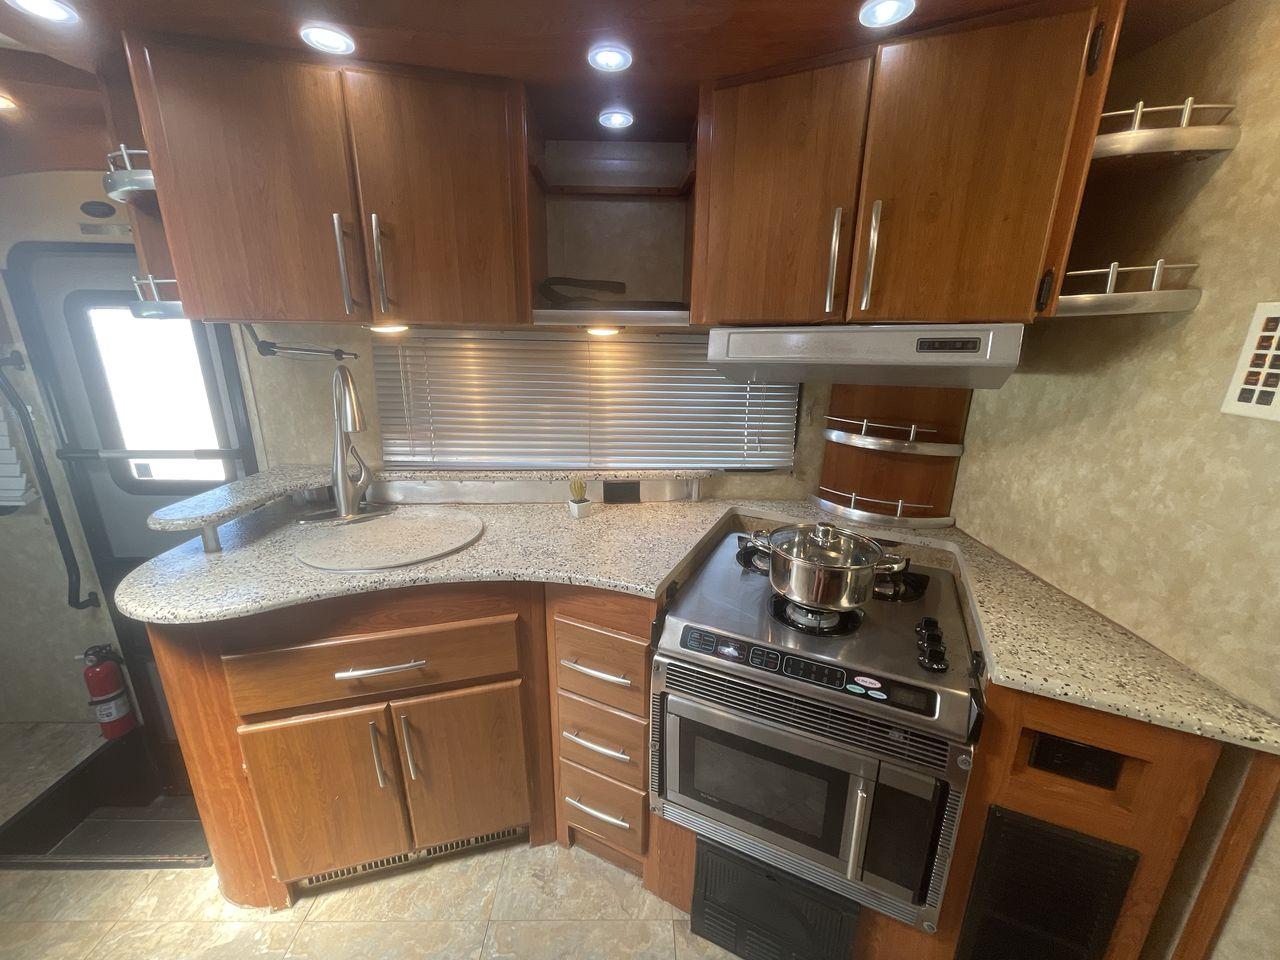 2008 TAN COACHMEN LEPRECHAUN 320DS E-450 (1FDXE45S08D) with an 6.8L V10 SOHC 20V engine, Length: 31.5 ft. | Dry Weight: 12,555 lbs. | Gross Weight: 14,500 lbs. | Slides: 2 transmission, located at 4319 N Main St, Cleburne, TX, 76033, (817) 678-5133, 32.385960, -97.391212 - Photo #10